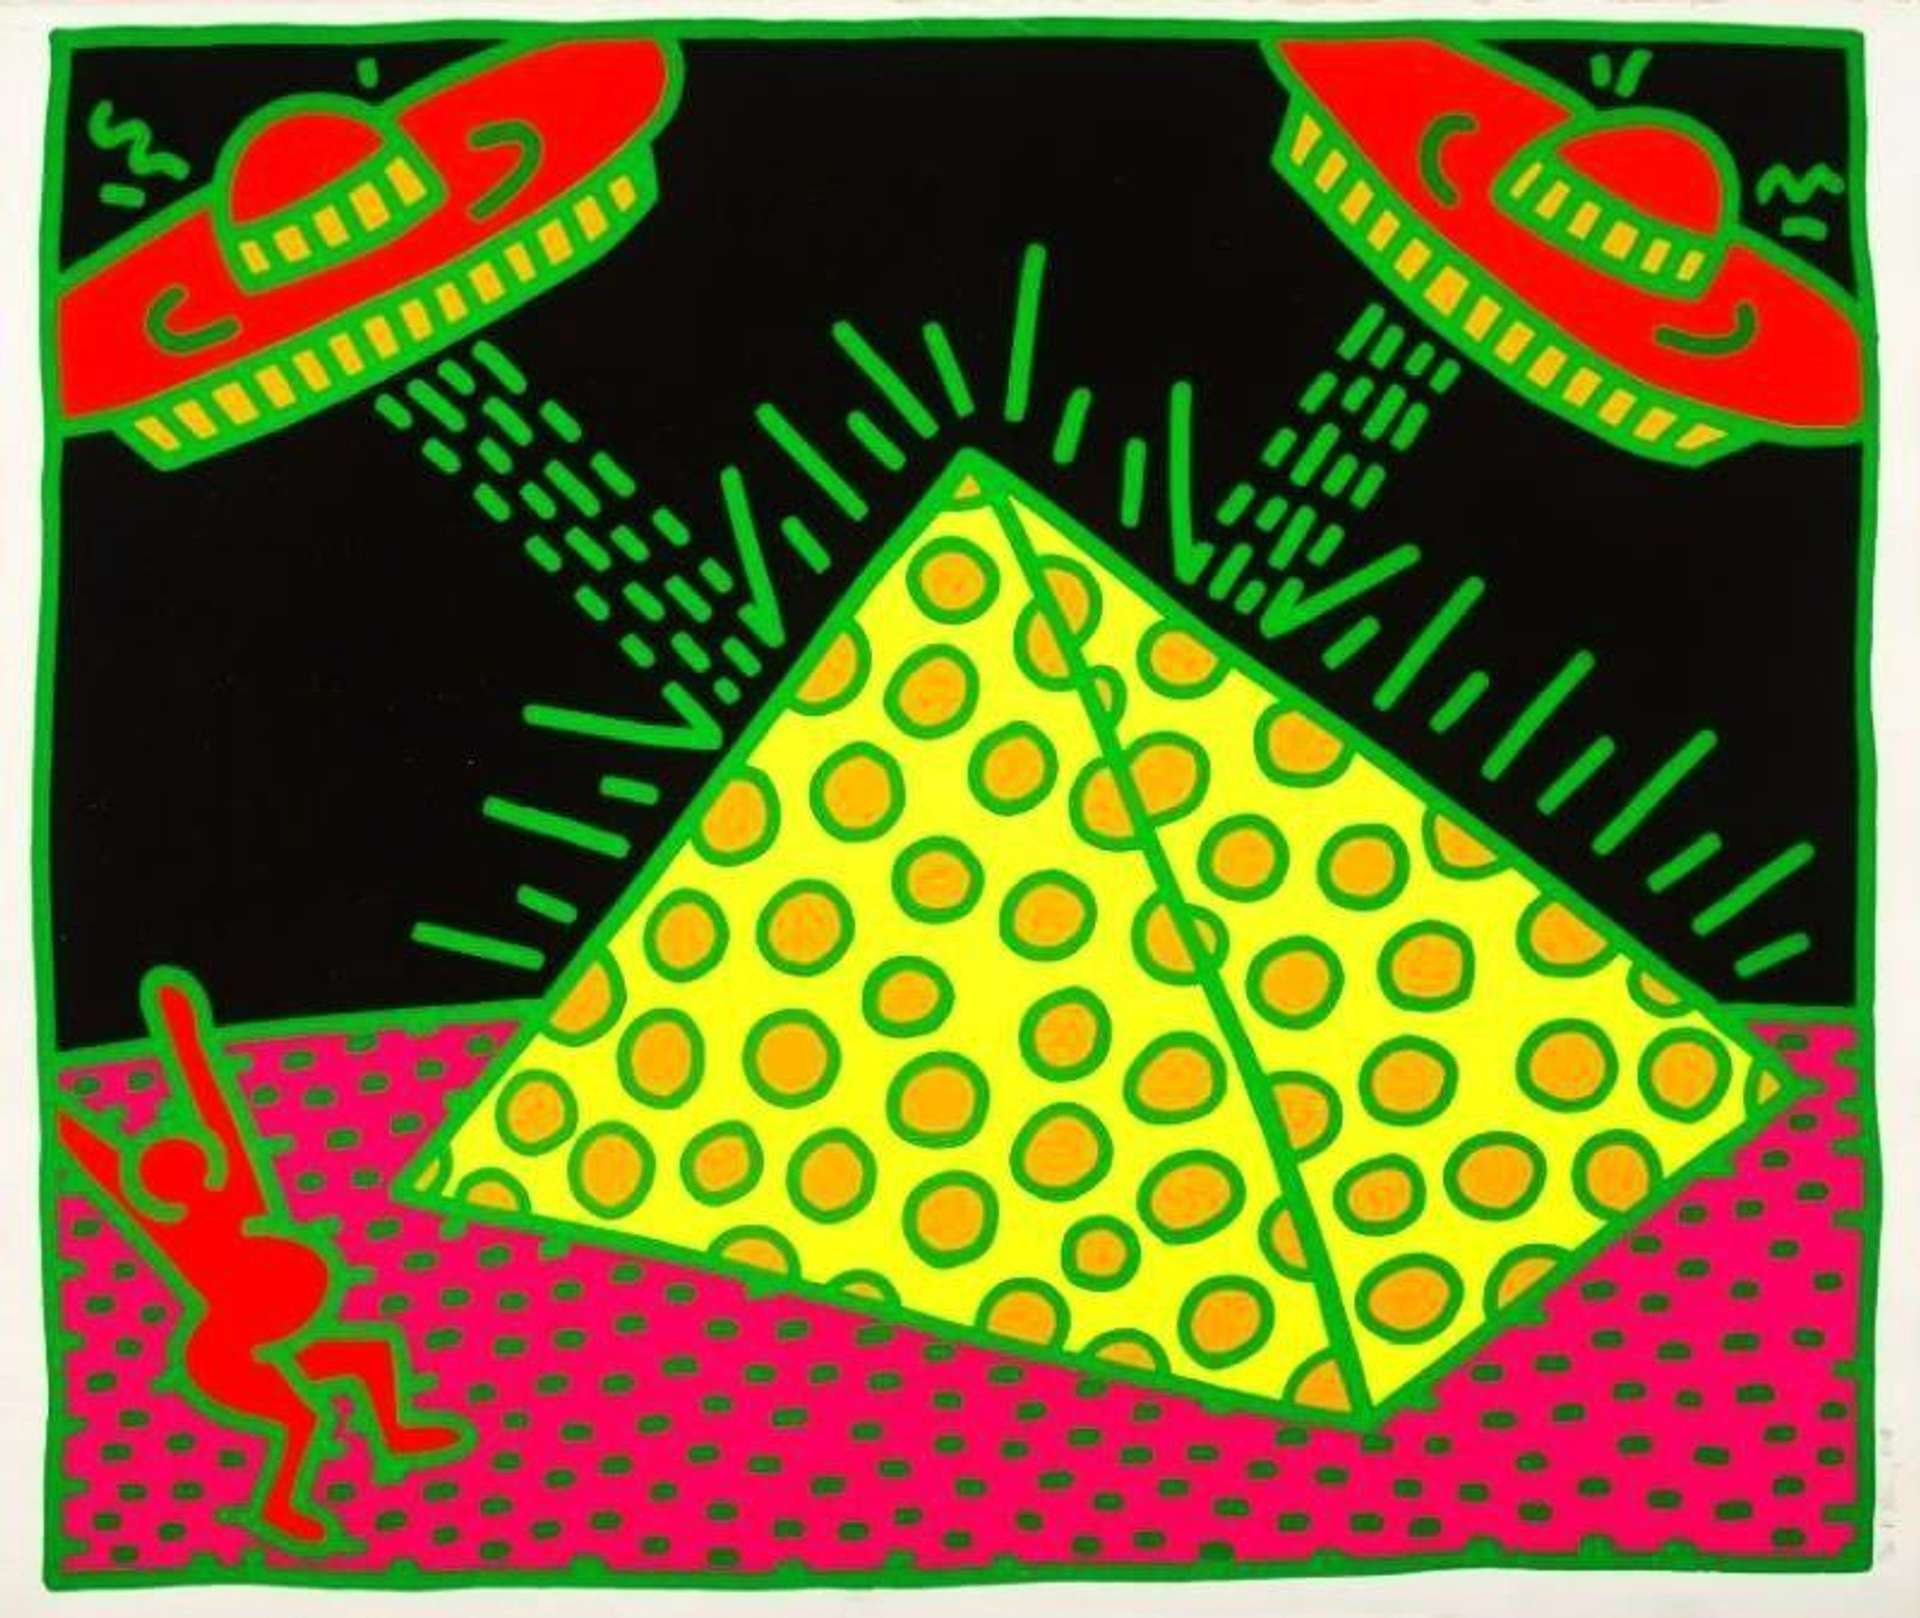 Keith Haring’s Fertility 2. A Pop Art screenprint of a yellow pyramid with orange polka dots with a pregnant figure outside of it and two red UFO above it. 